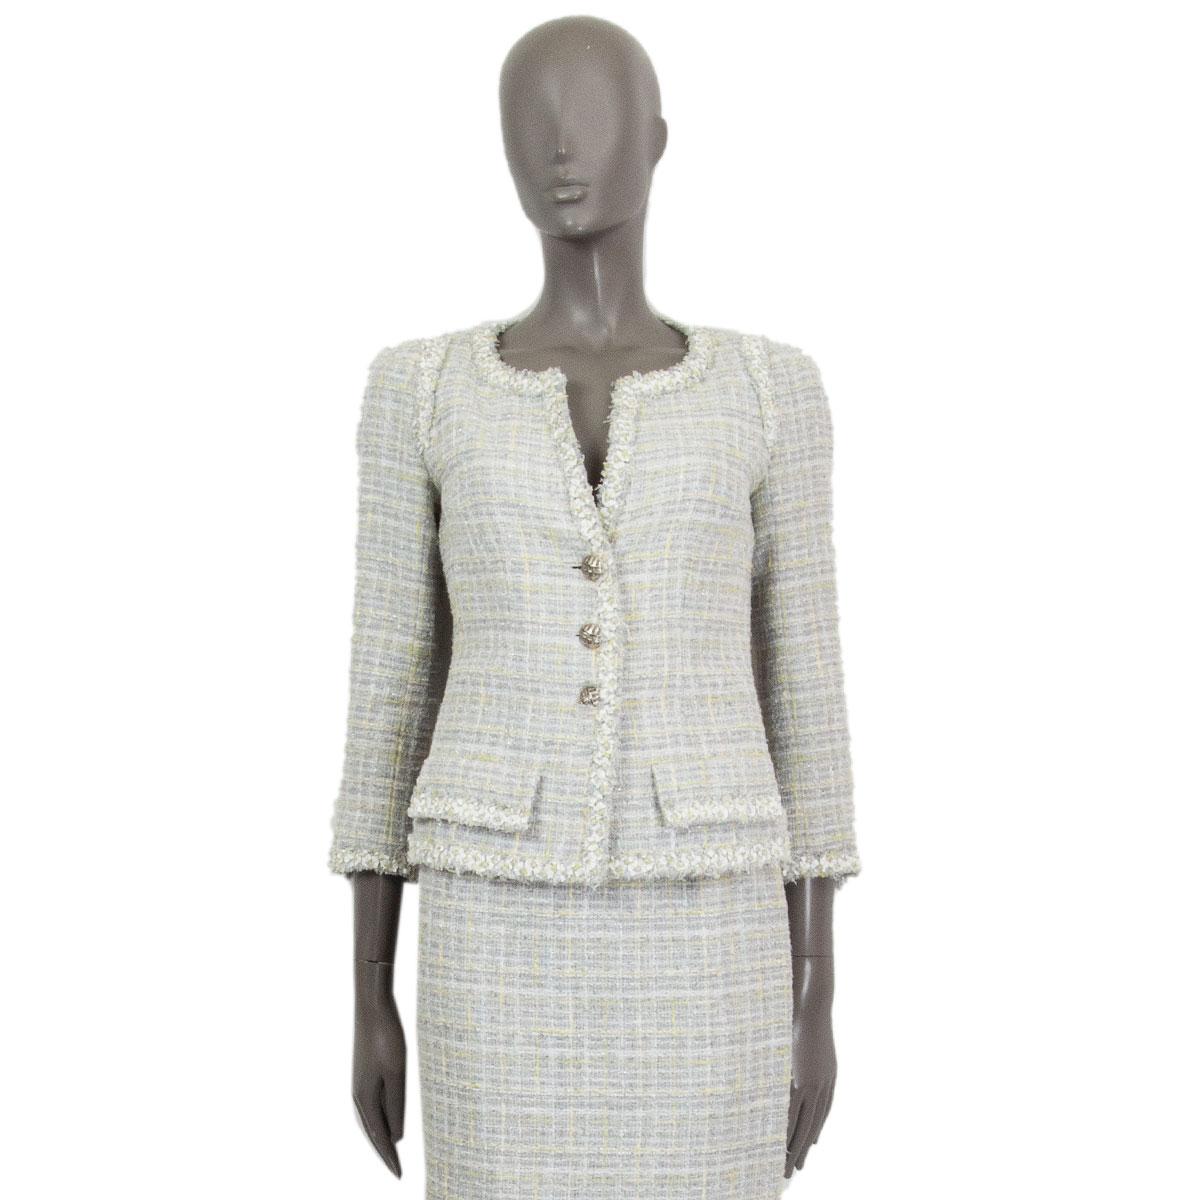 100% authentic Chanel buttoned boucle jacket in light grey, white, lime cotton (56%), wool (19%), rayon (18%), nylon (6%) and polyester (1%) with embroidery at the collar, front-hem, bottom-hem and cuffs. Closes with three logo embossed buttons on